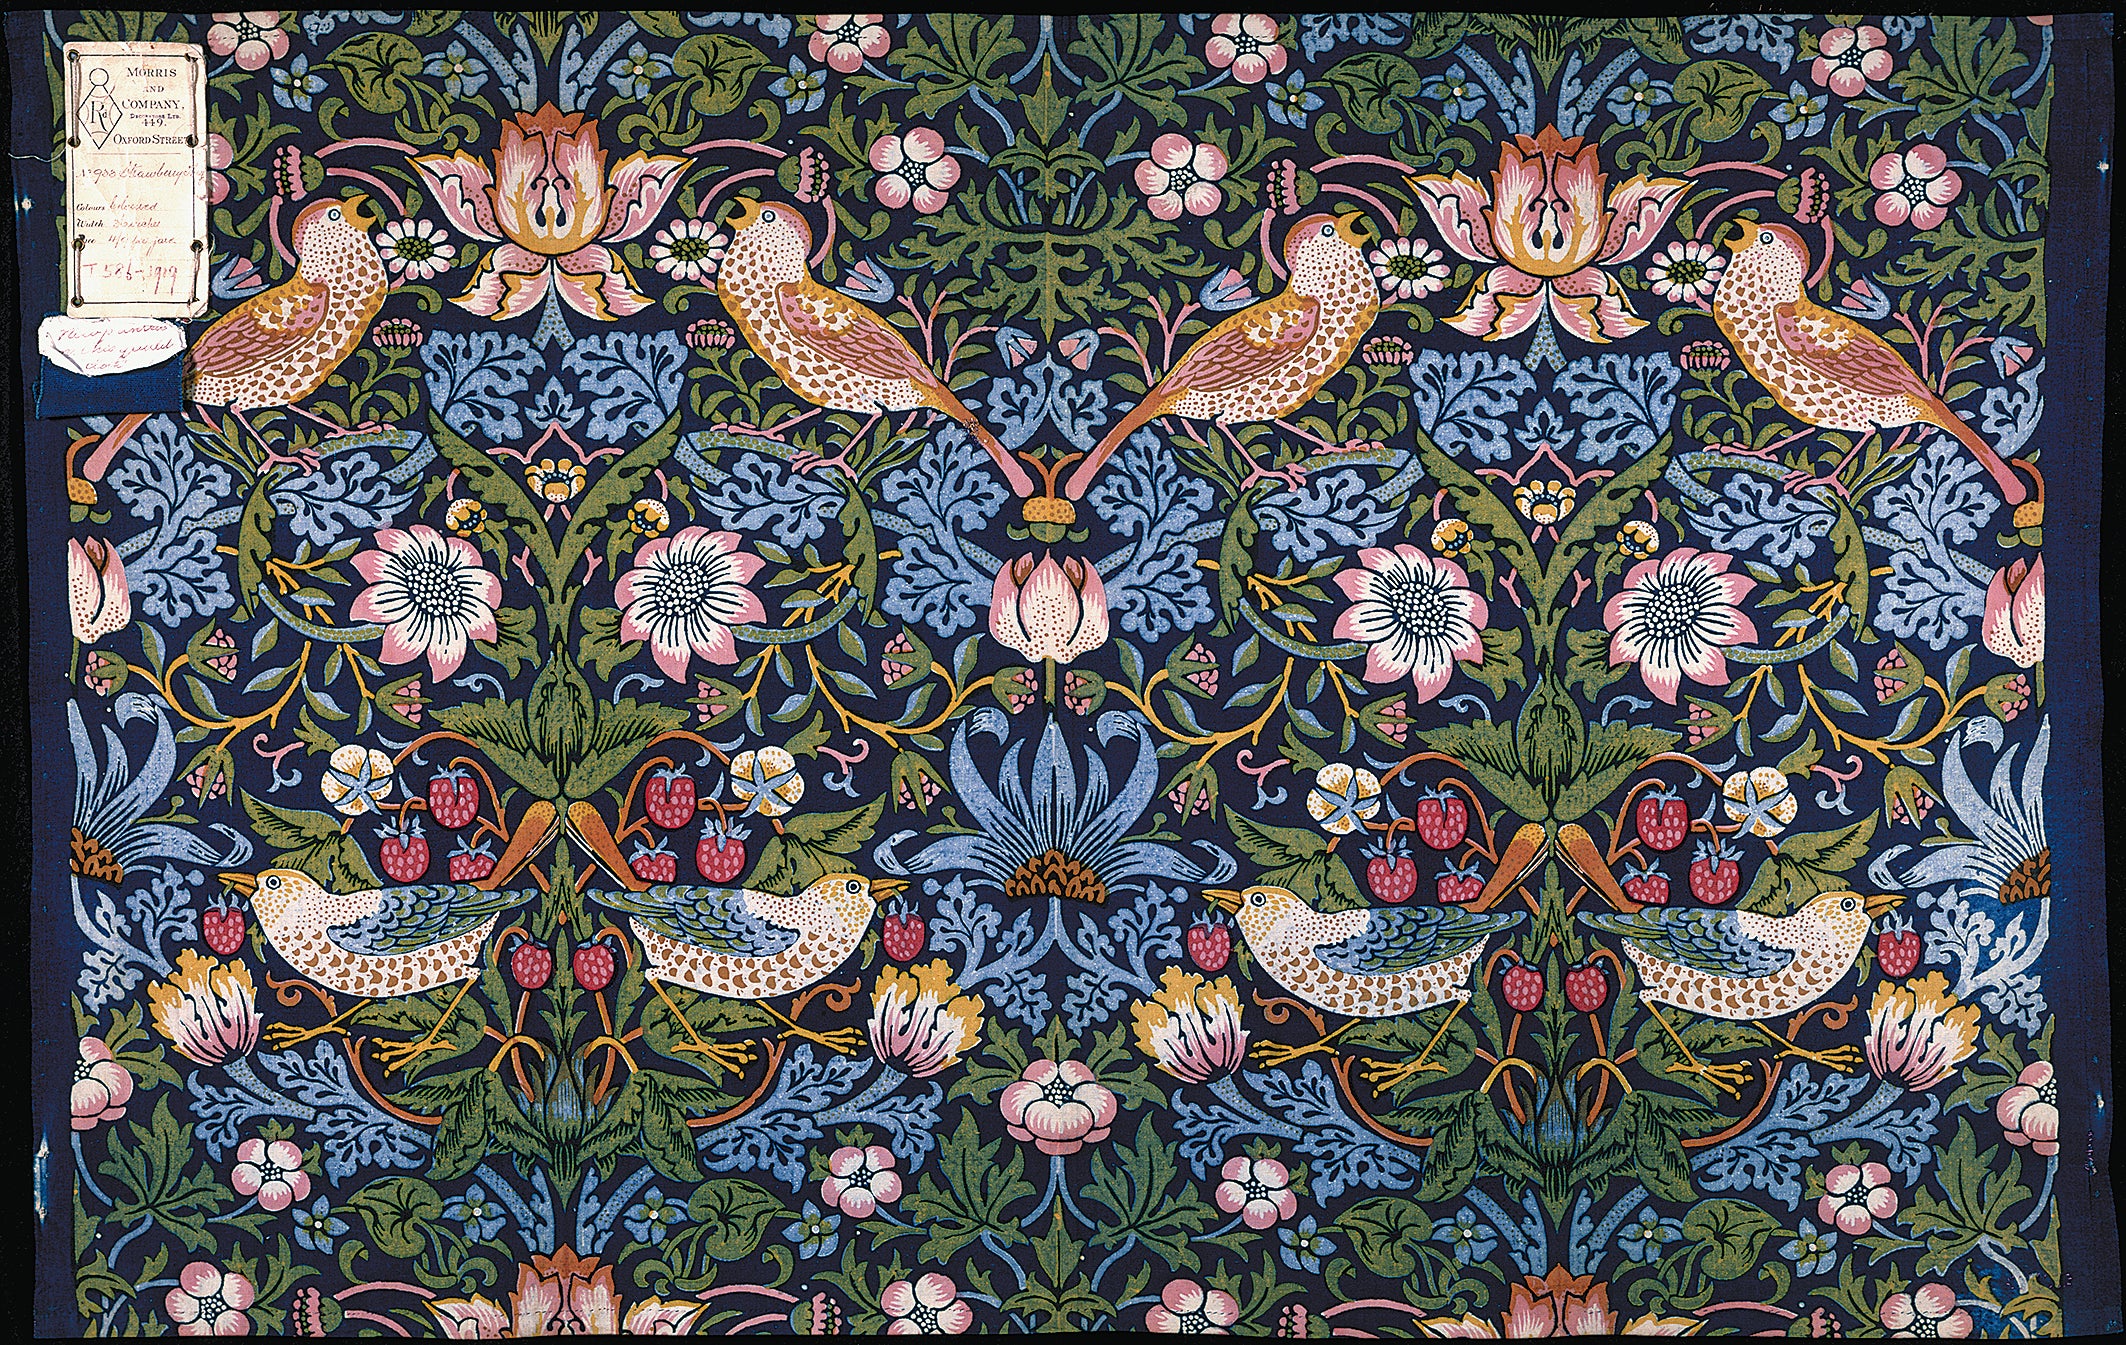 The Strawberry Thief textile pattern, designed by Morris and made around 1883, on indigo-discharged and block-printed cotton.